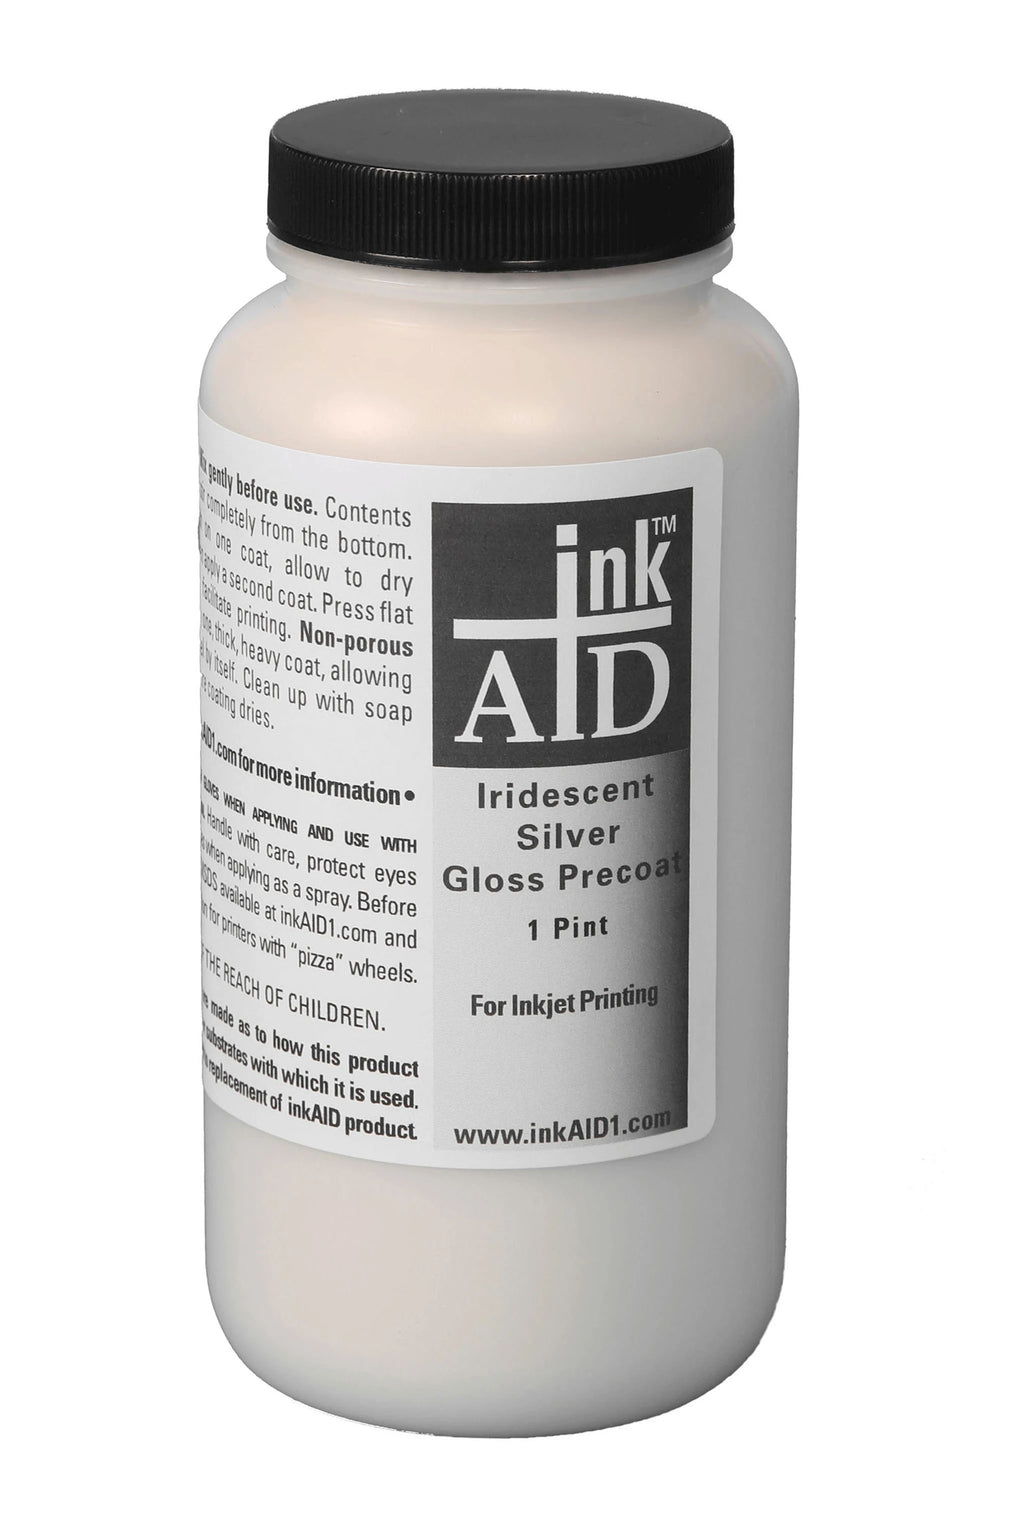 inkAID Iridescent Silver inkjet, ink receptive coating can be applied to any material that can go through your inkjet printer. It provides a glowing, reflective, iridescent surface that enhances the color of the ink, which changes slightly as you adjust your viewing angle. Works well in digital mixed media art.